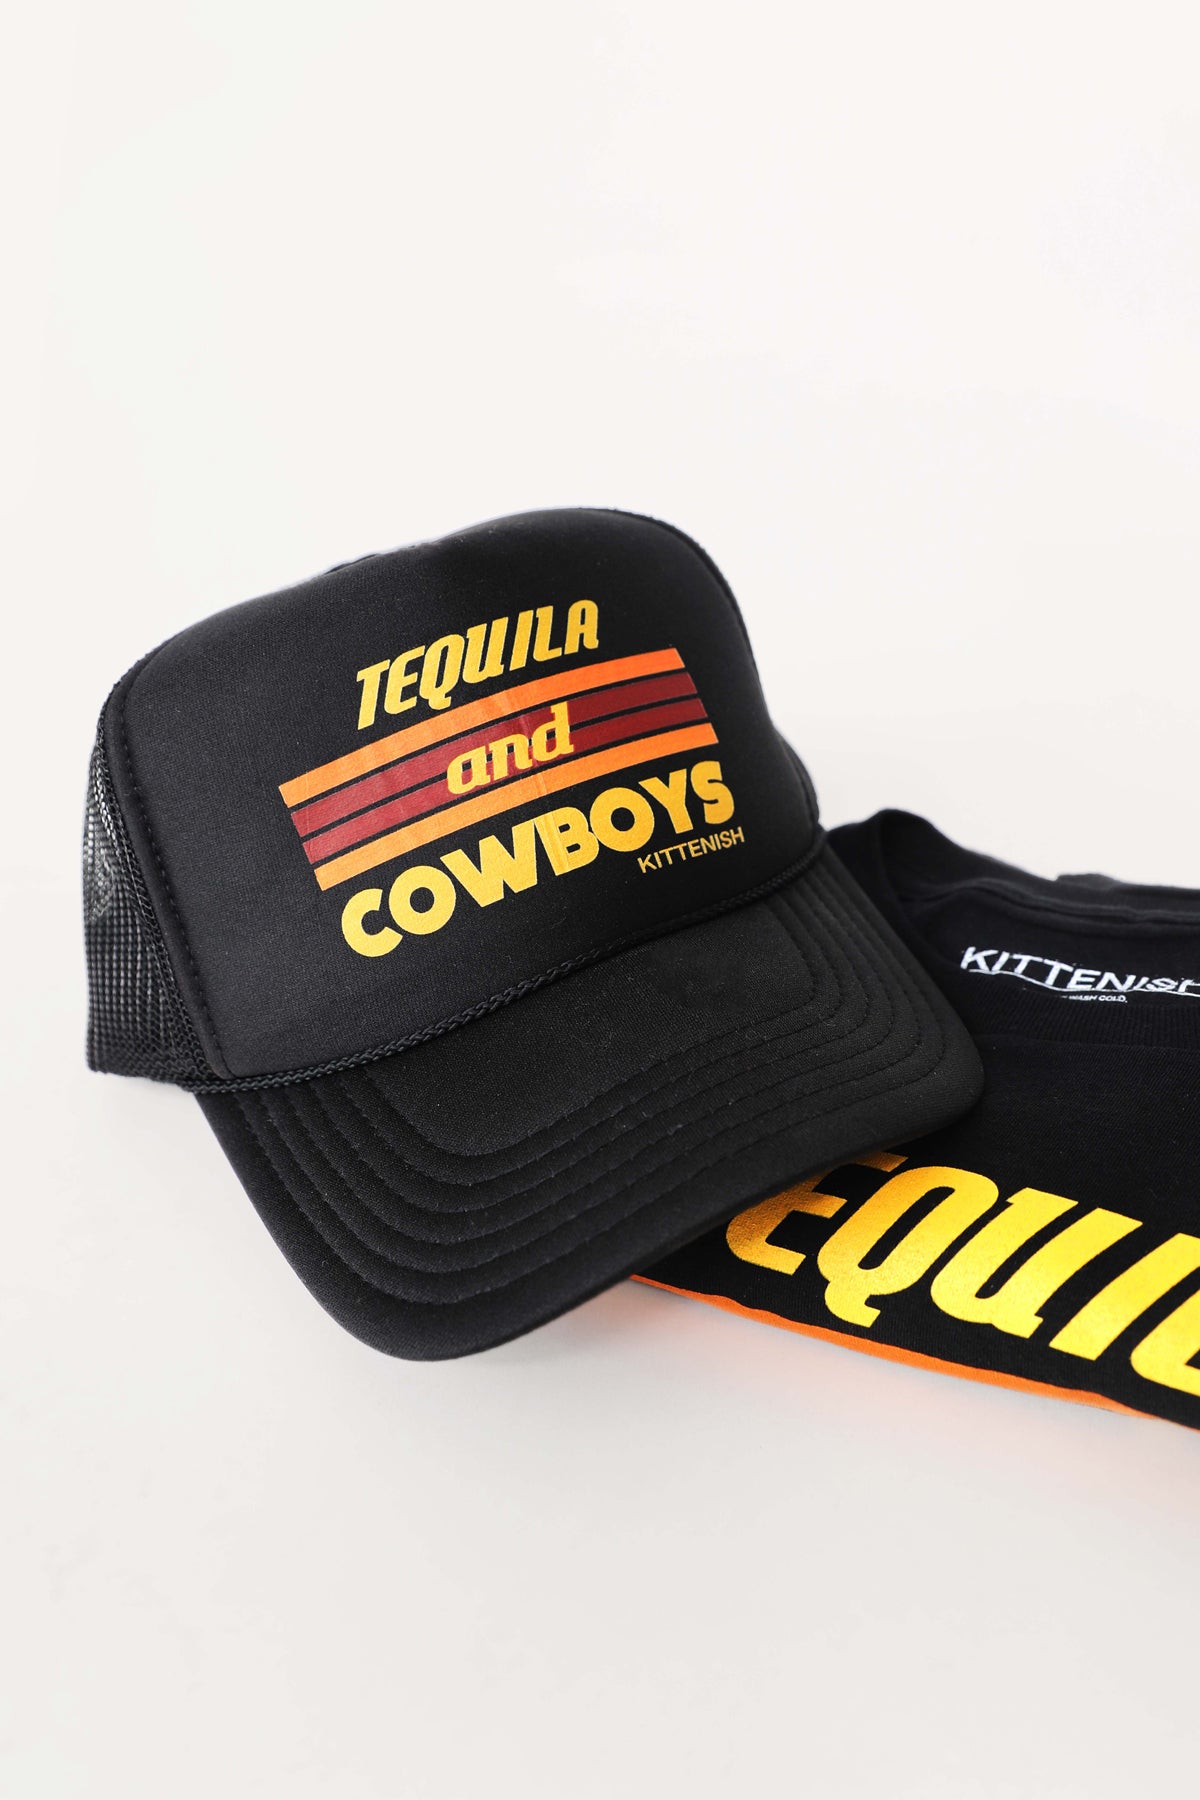 Tequila and Cowboys trucker hat.